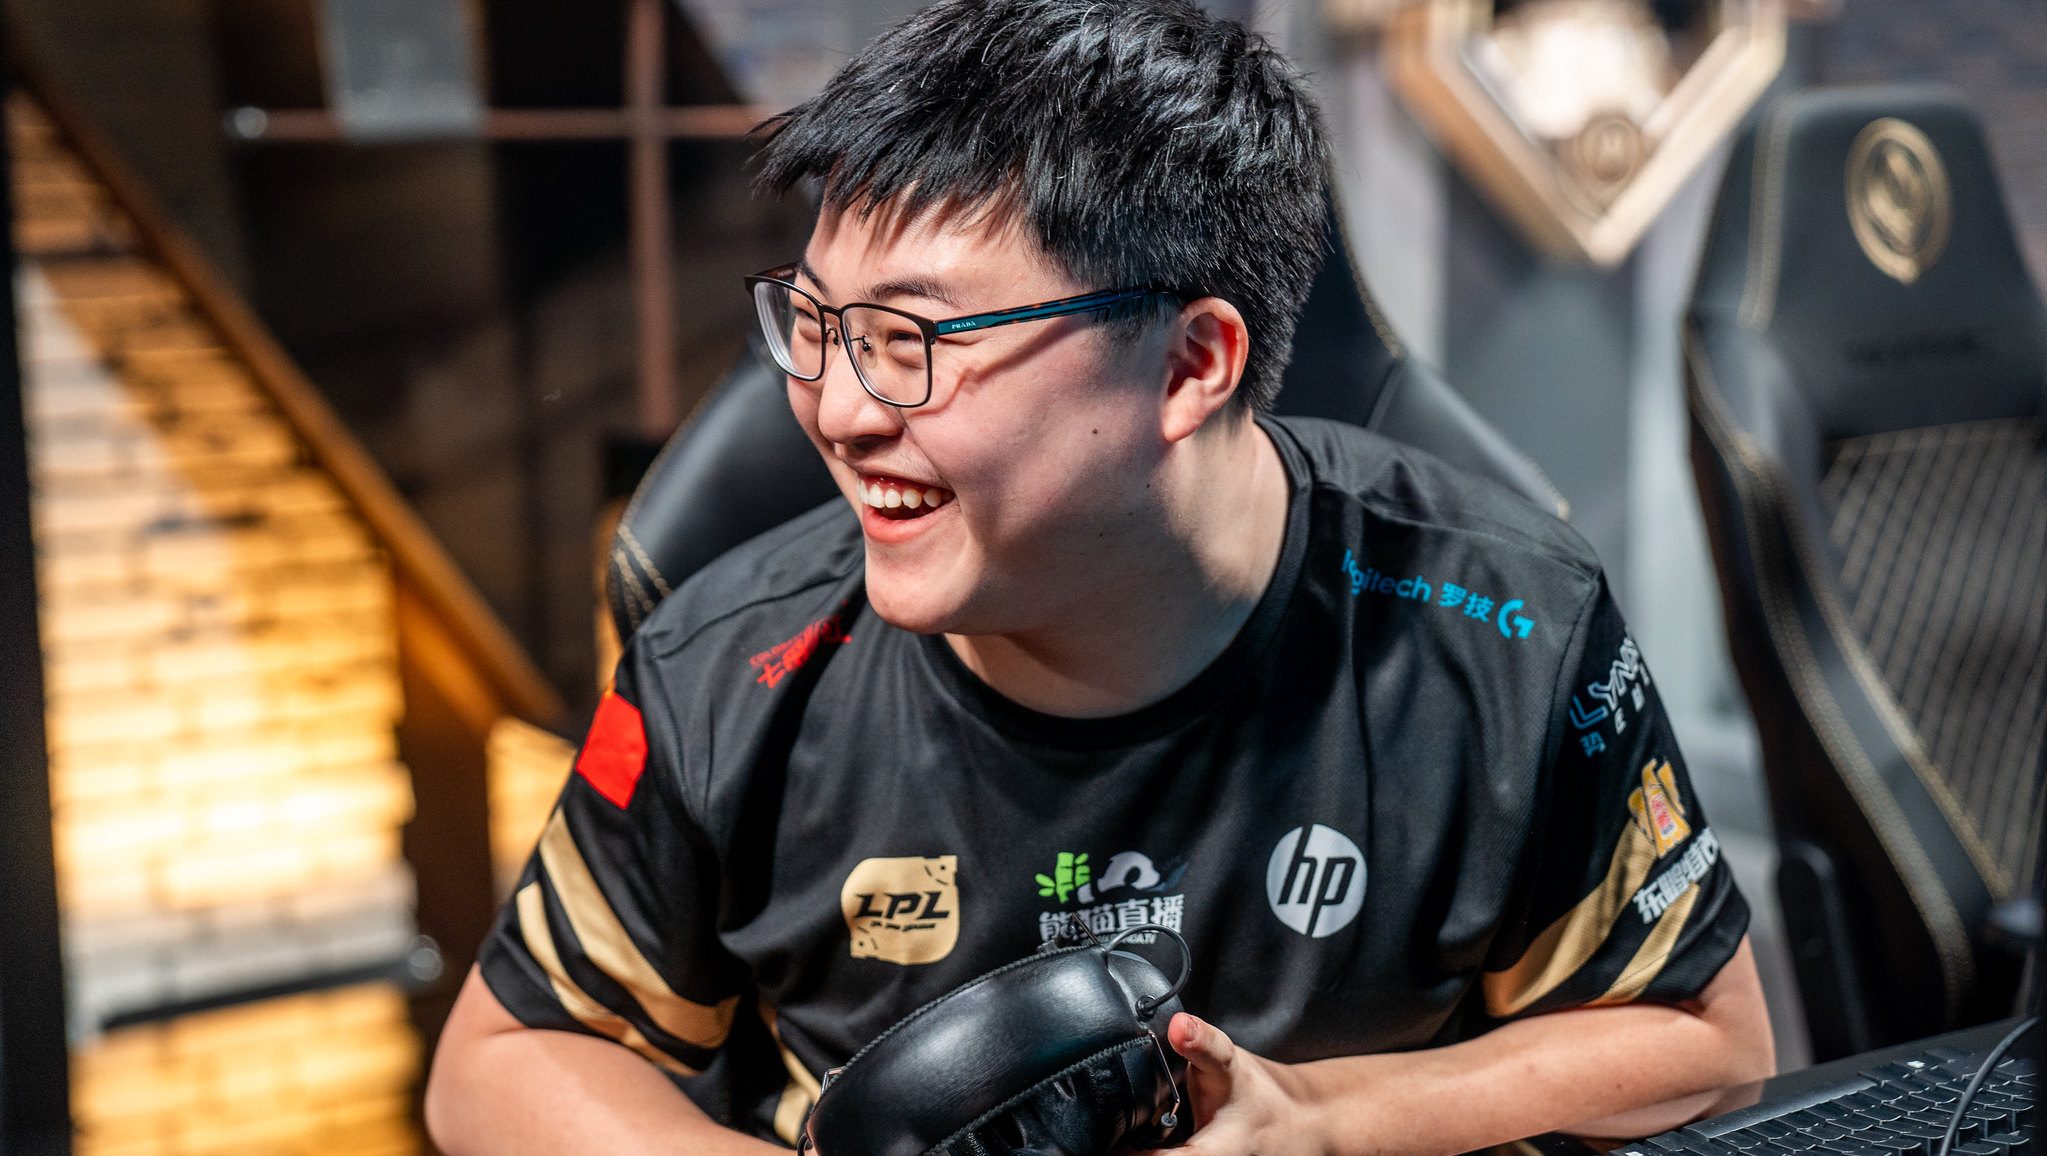 The Legendary ADC Uzi Retires: Uzi's retirement was announced by tweet early Wednesday morning